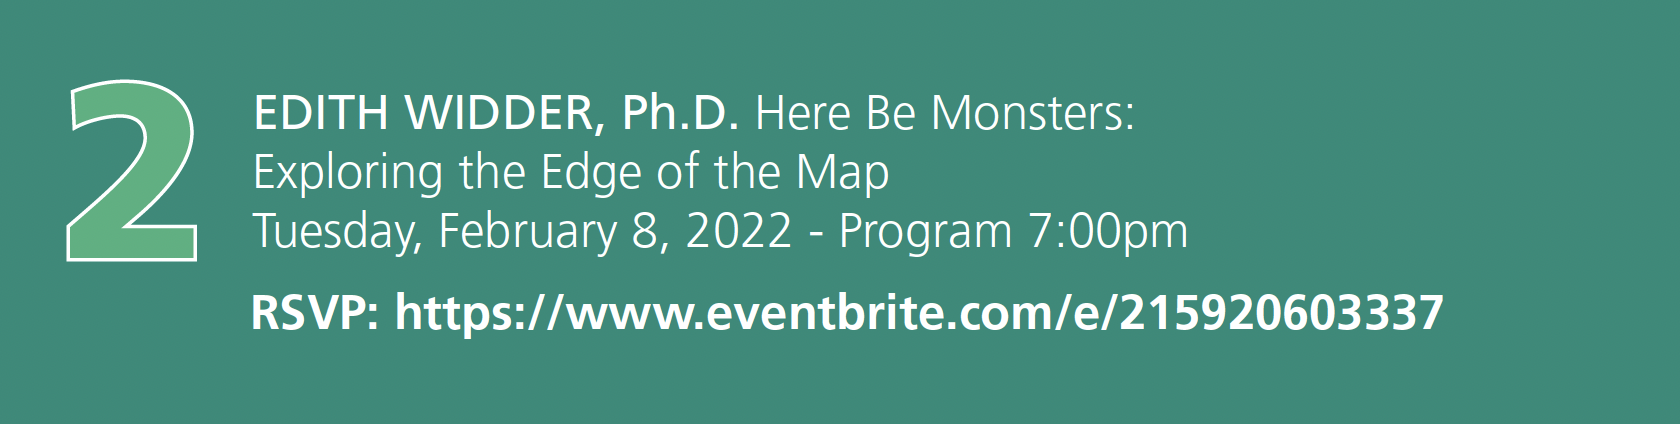 Number 2. Edith Widder, Ph.D. Here be Monsters: Exploring the Edge of the Map. Tuesday February 8th, 2022 - Program 7:00pm. RSVP : event registration link embedded in image